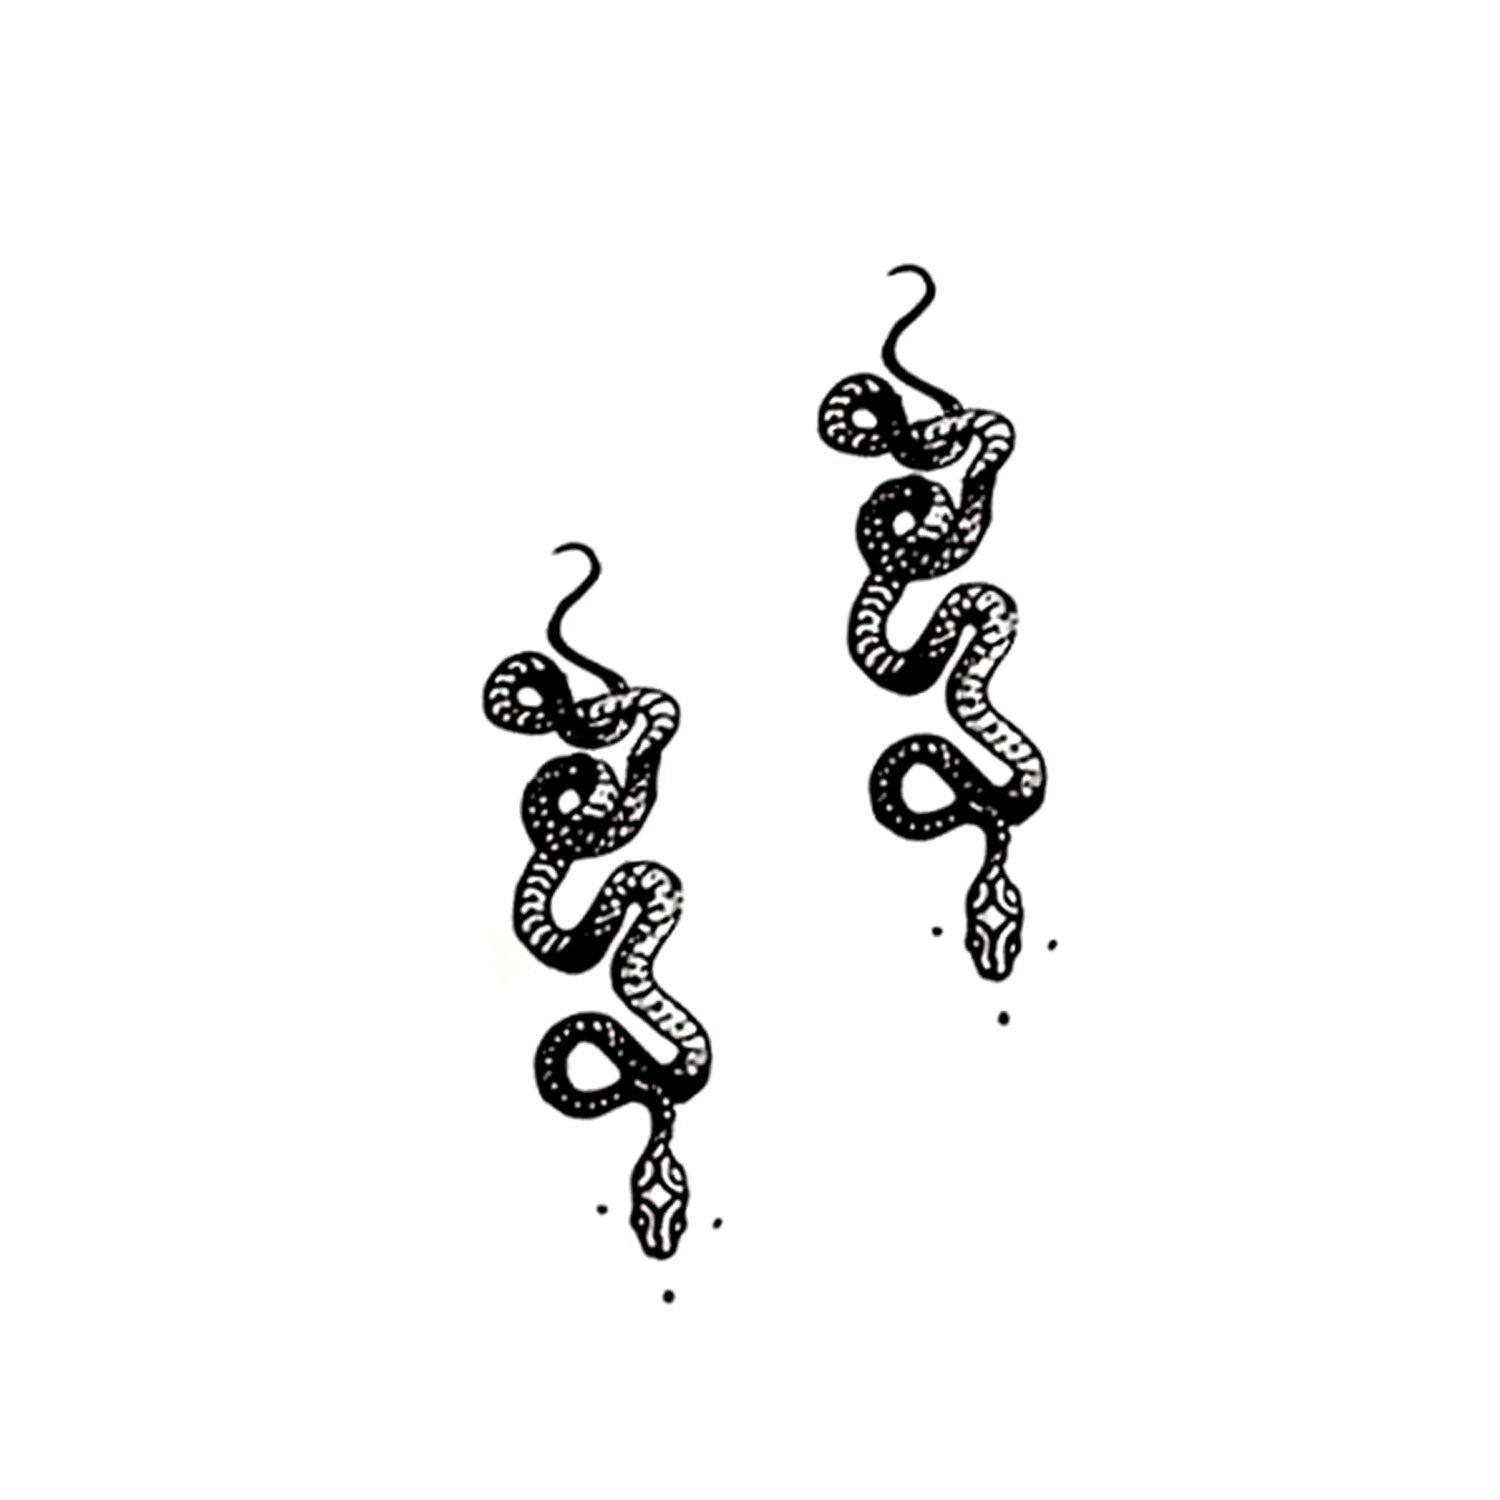 SIMPLY INKED New Small Snake Temporary Tattoo, Designer Tattoo for all (New small  snake tattoo) Pack of 2 - JioMart